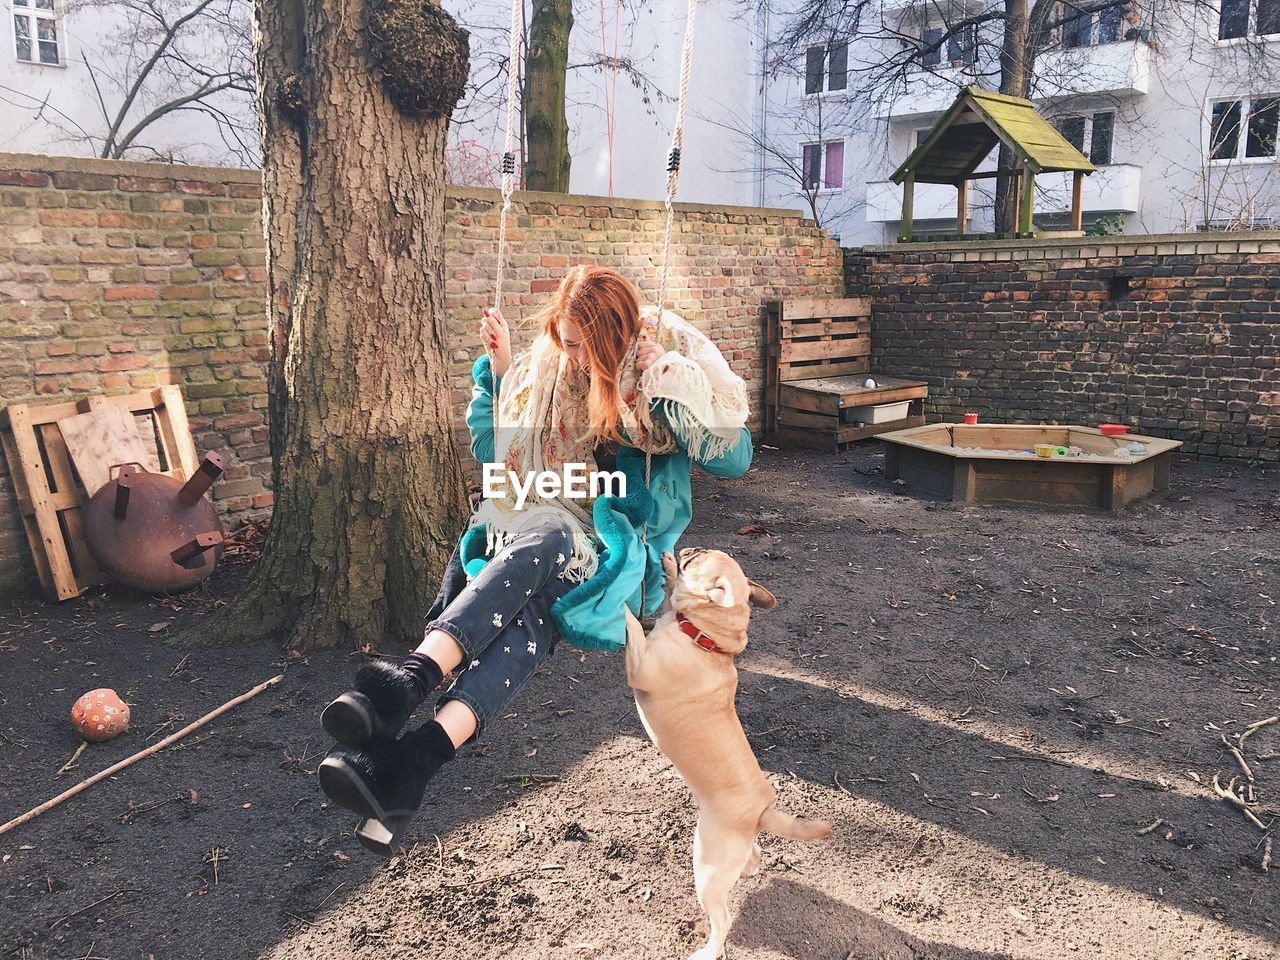 Woman on swing with dog